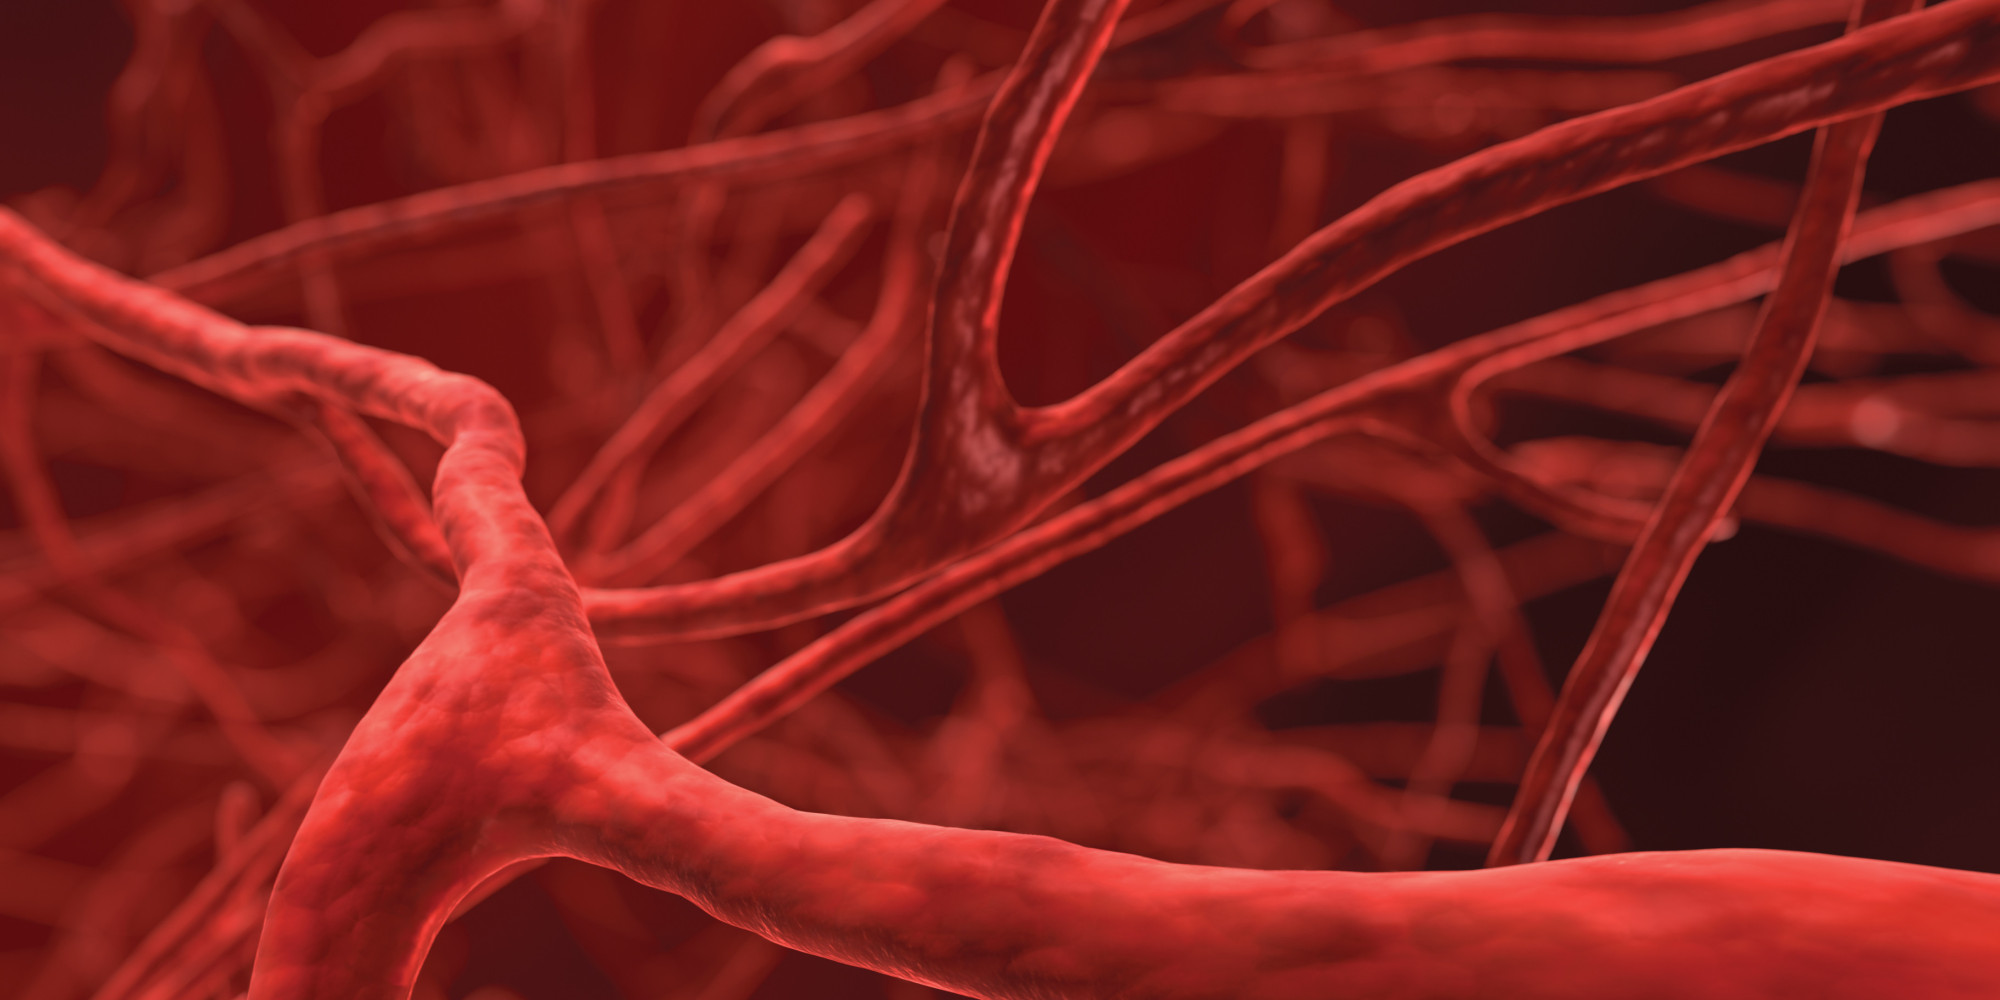 Scientists Can Now 3d Print Human Blood Vessels Huffpost Uk